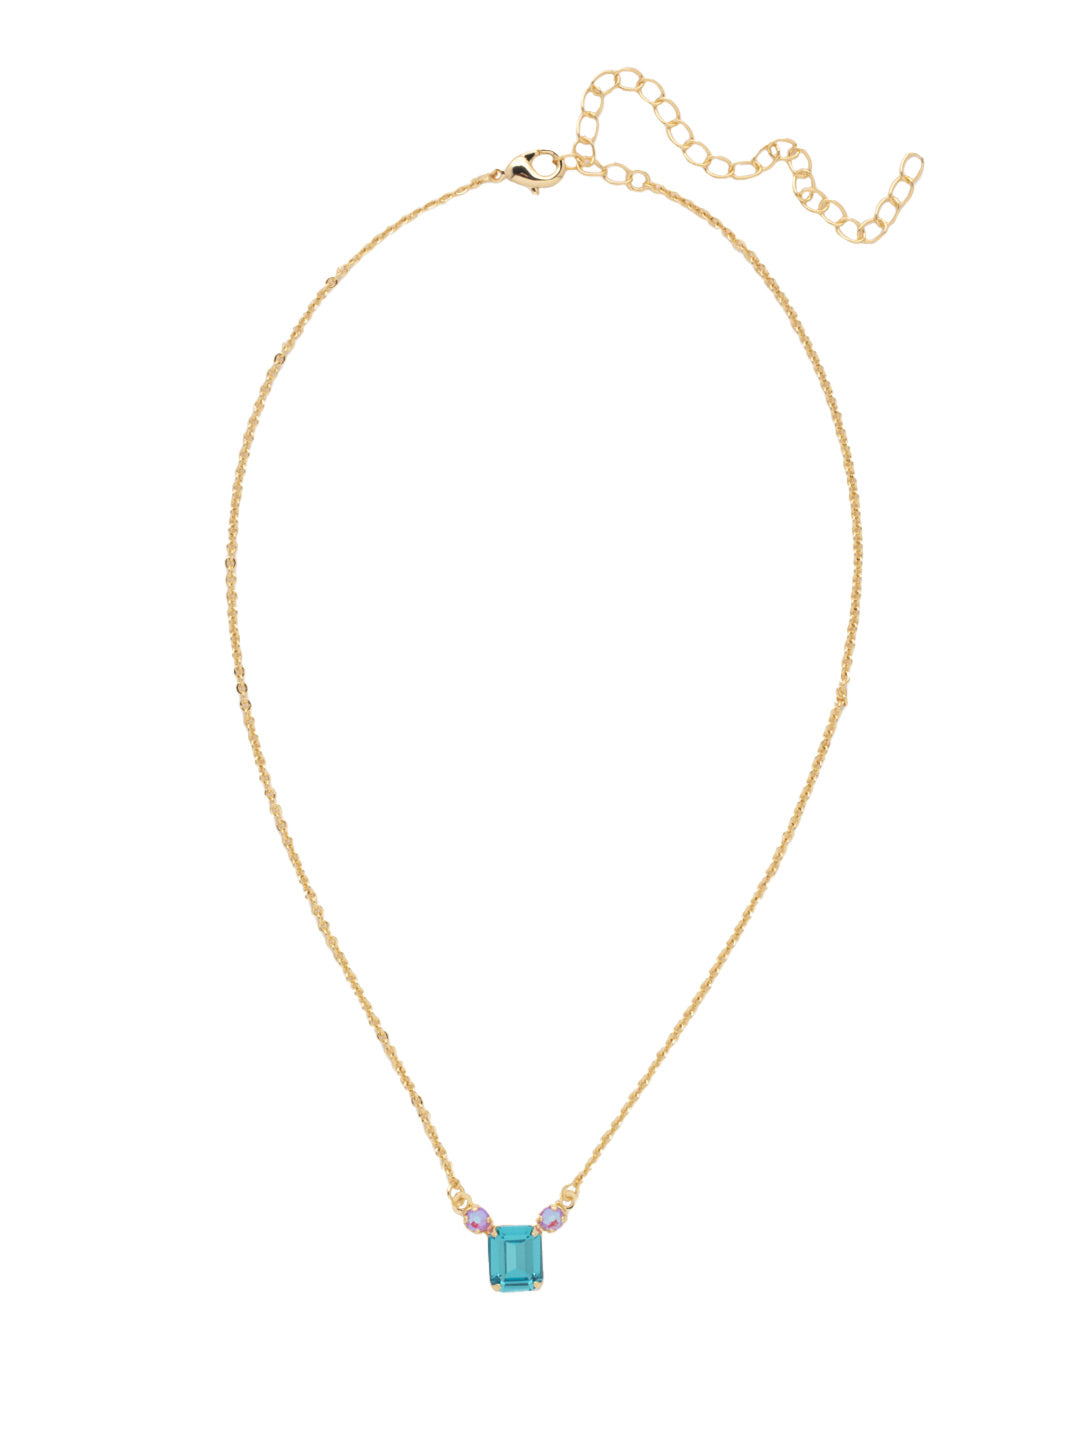 Octavia Petite Pendant Necklace - NFF6BGHBR - <p>The Octavia Petite Pendant Necklace features a small octagon cut crystal between two round cut crystals on an adjustable chain, secured by a lobster claw clasp. From Sorrelli's Happy Birthday Redux collection in our Bright Gold-tone finish.</p>